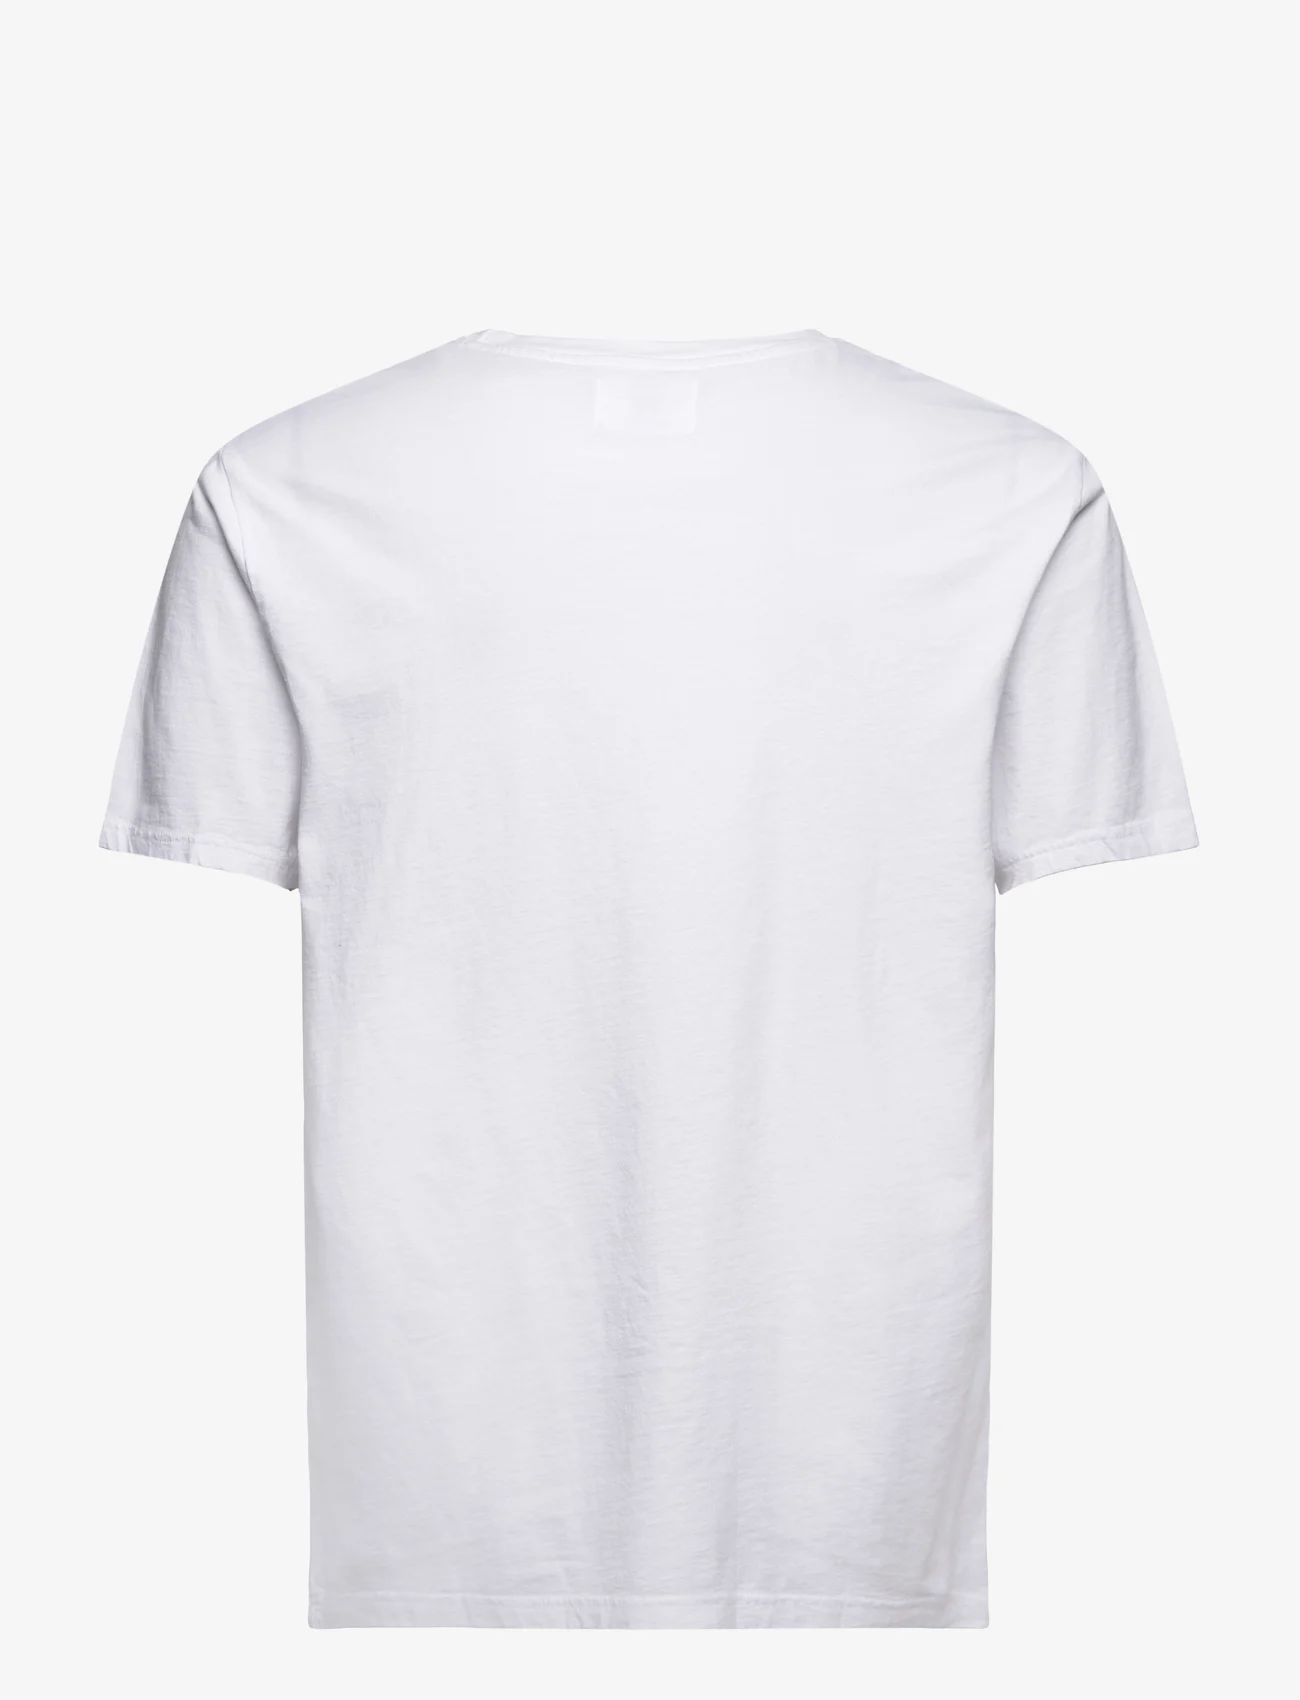 Double A by Wood Wood - Ace T-shirt - short-sleeved - white/white - 1